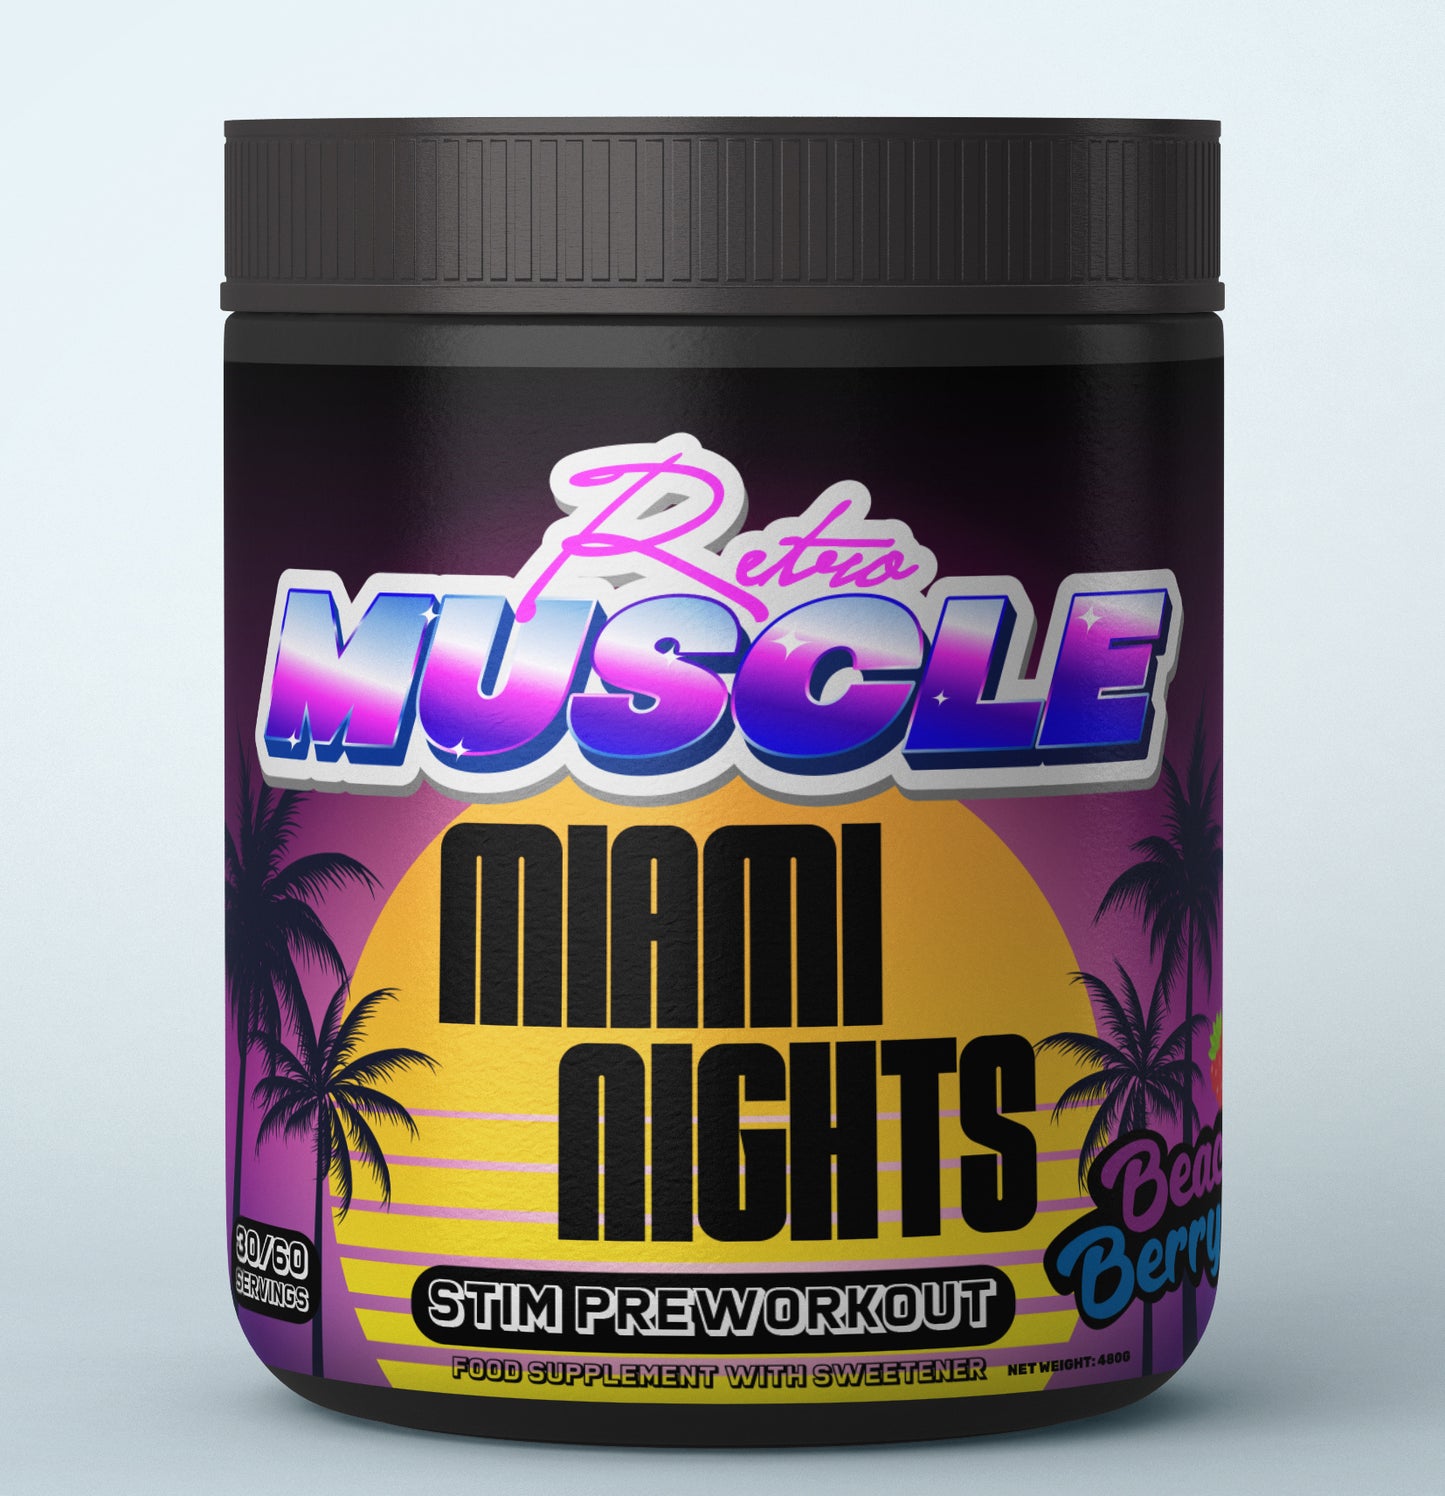 Retro Muscle Miami Nights Pre-Workout 480g